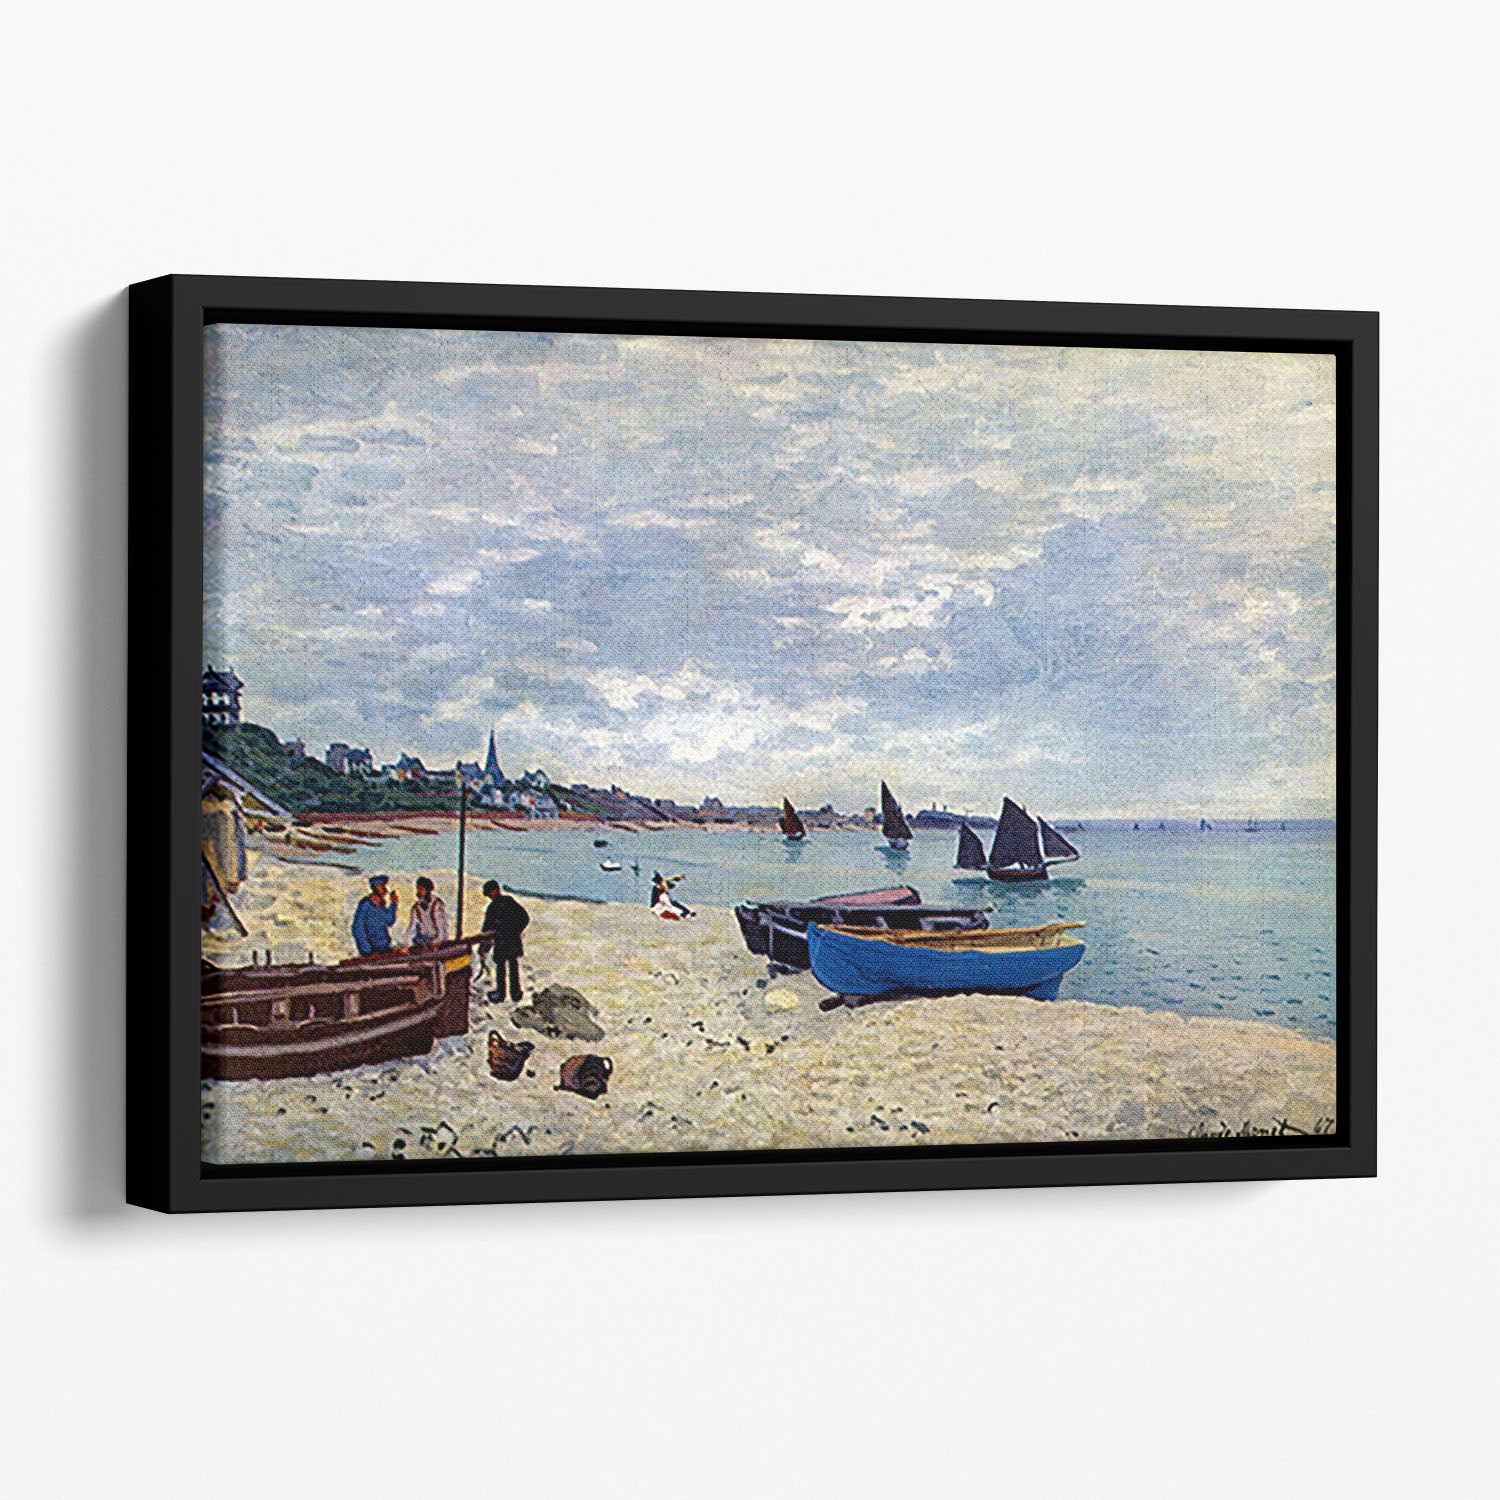 The Beach at Sainte Adresse 2 by Monet Floating Framed Canvas